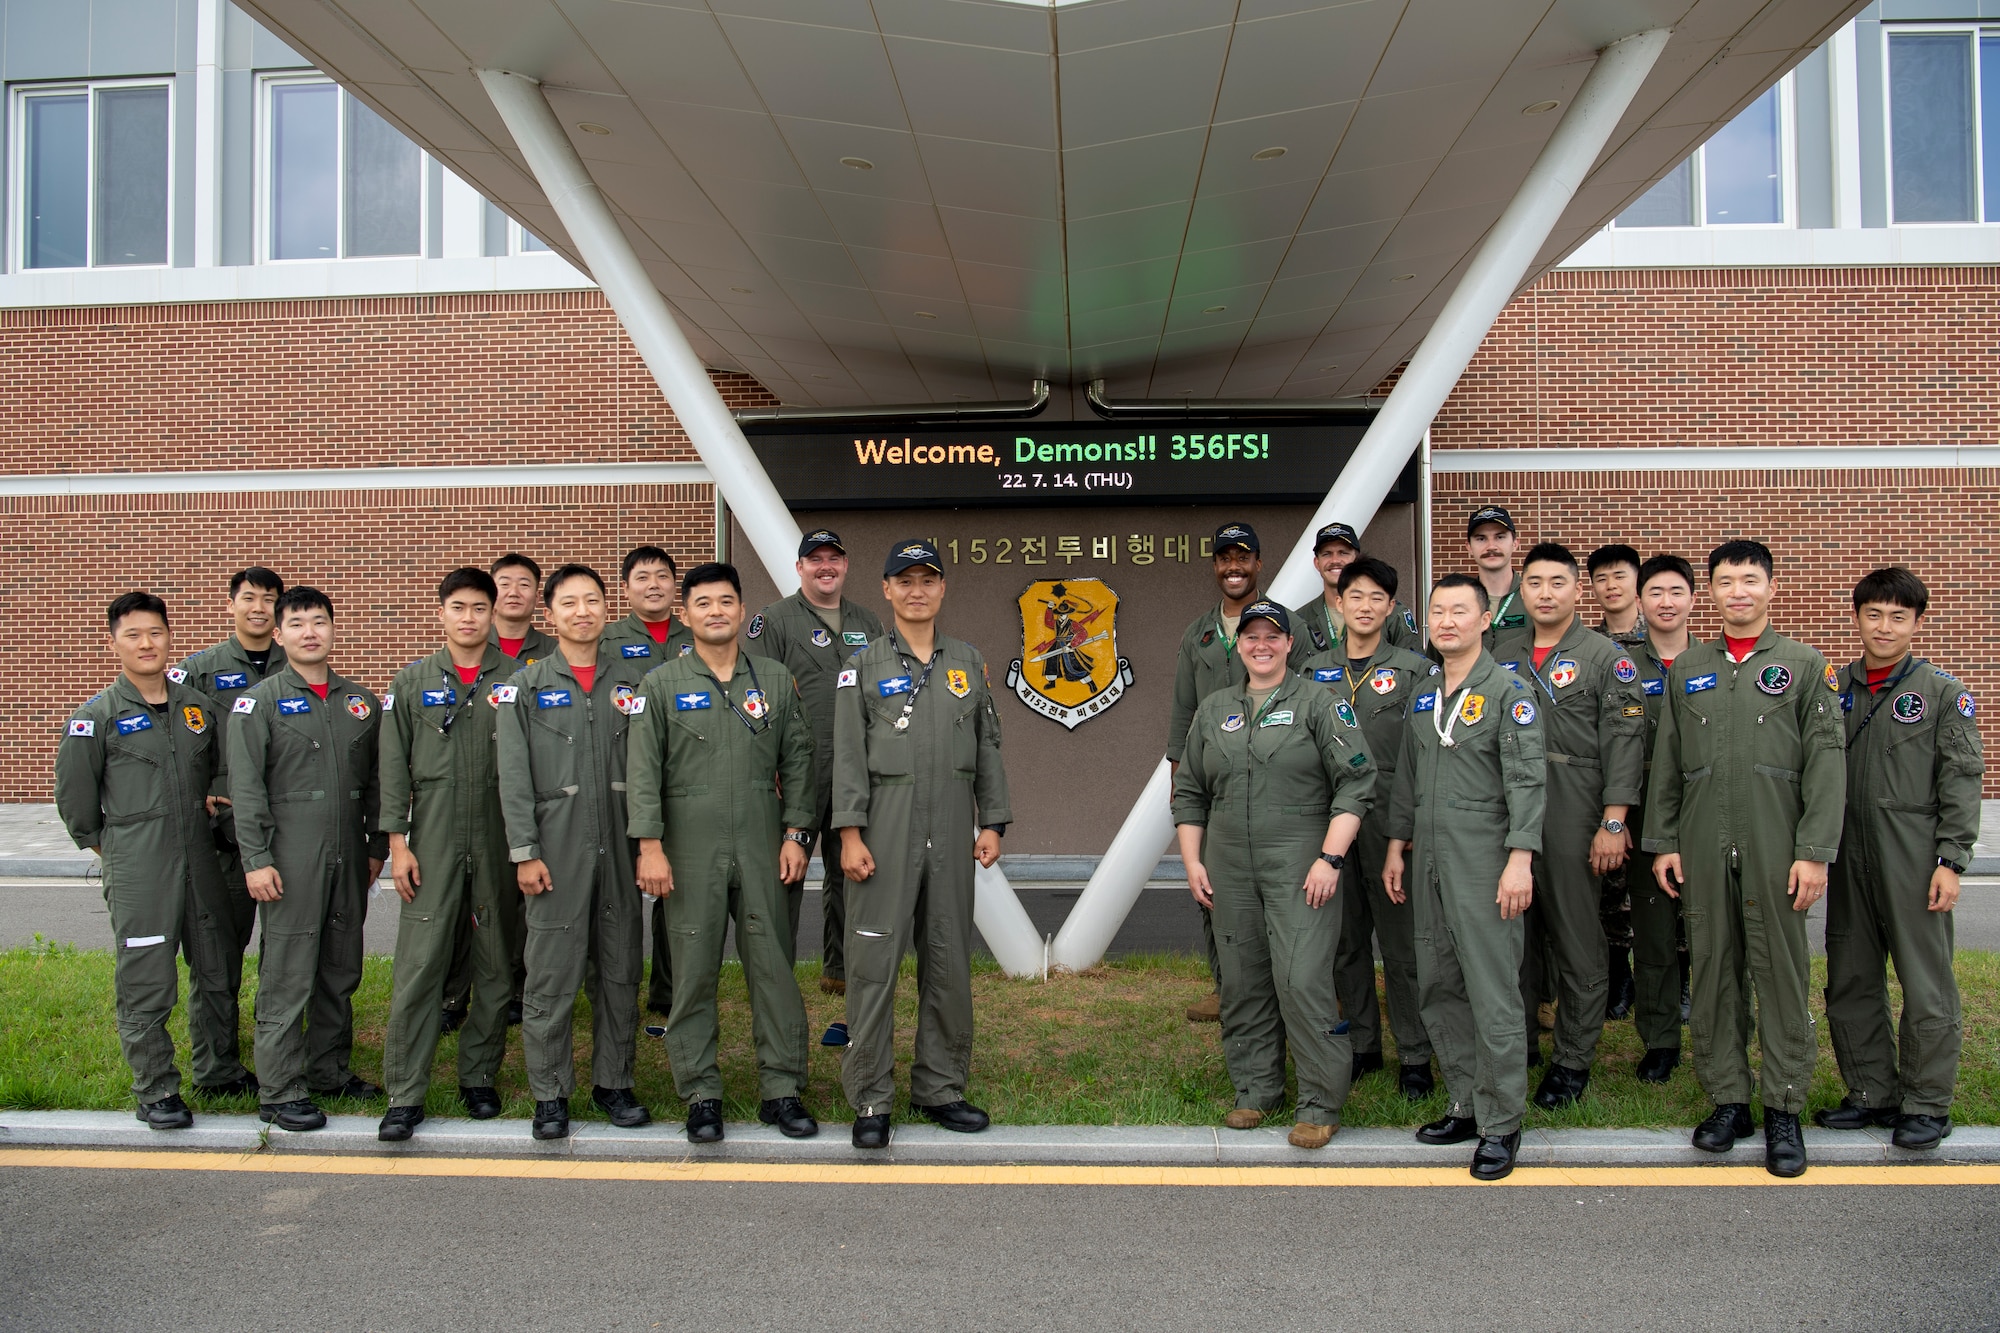 Republic of Korea Air Force (ROKAF) F-35 pilots from the 152nd Fighter Squadron, stand in front of their squadron building with U.S. Air Force (USAF) F-35 pilots assigned to the 356th Fighter Squadron from Eielson Air Force Base, Alaska, at Cheonju Air Base, Republic of Korea, July 14, 2022. Over the past week, F-35 pilots from the ROKAF and USAF flew together increasing their knowledge of each other’s tactics and procedures, while also strengthening the ROK-U.S. alliance. (U.S. Air Force photo by Master Sgt. Kenneth W. Norman)